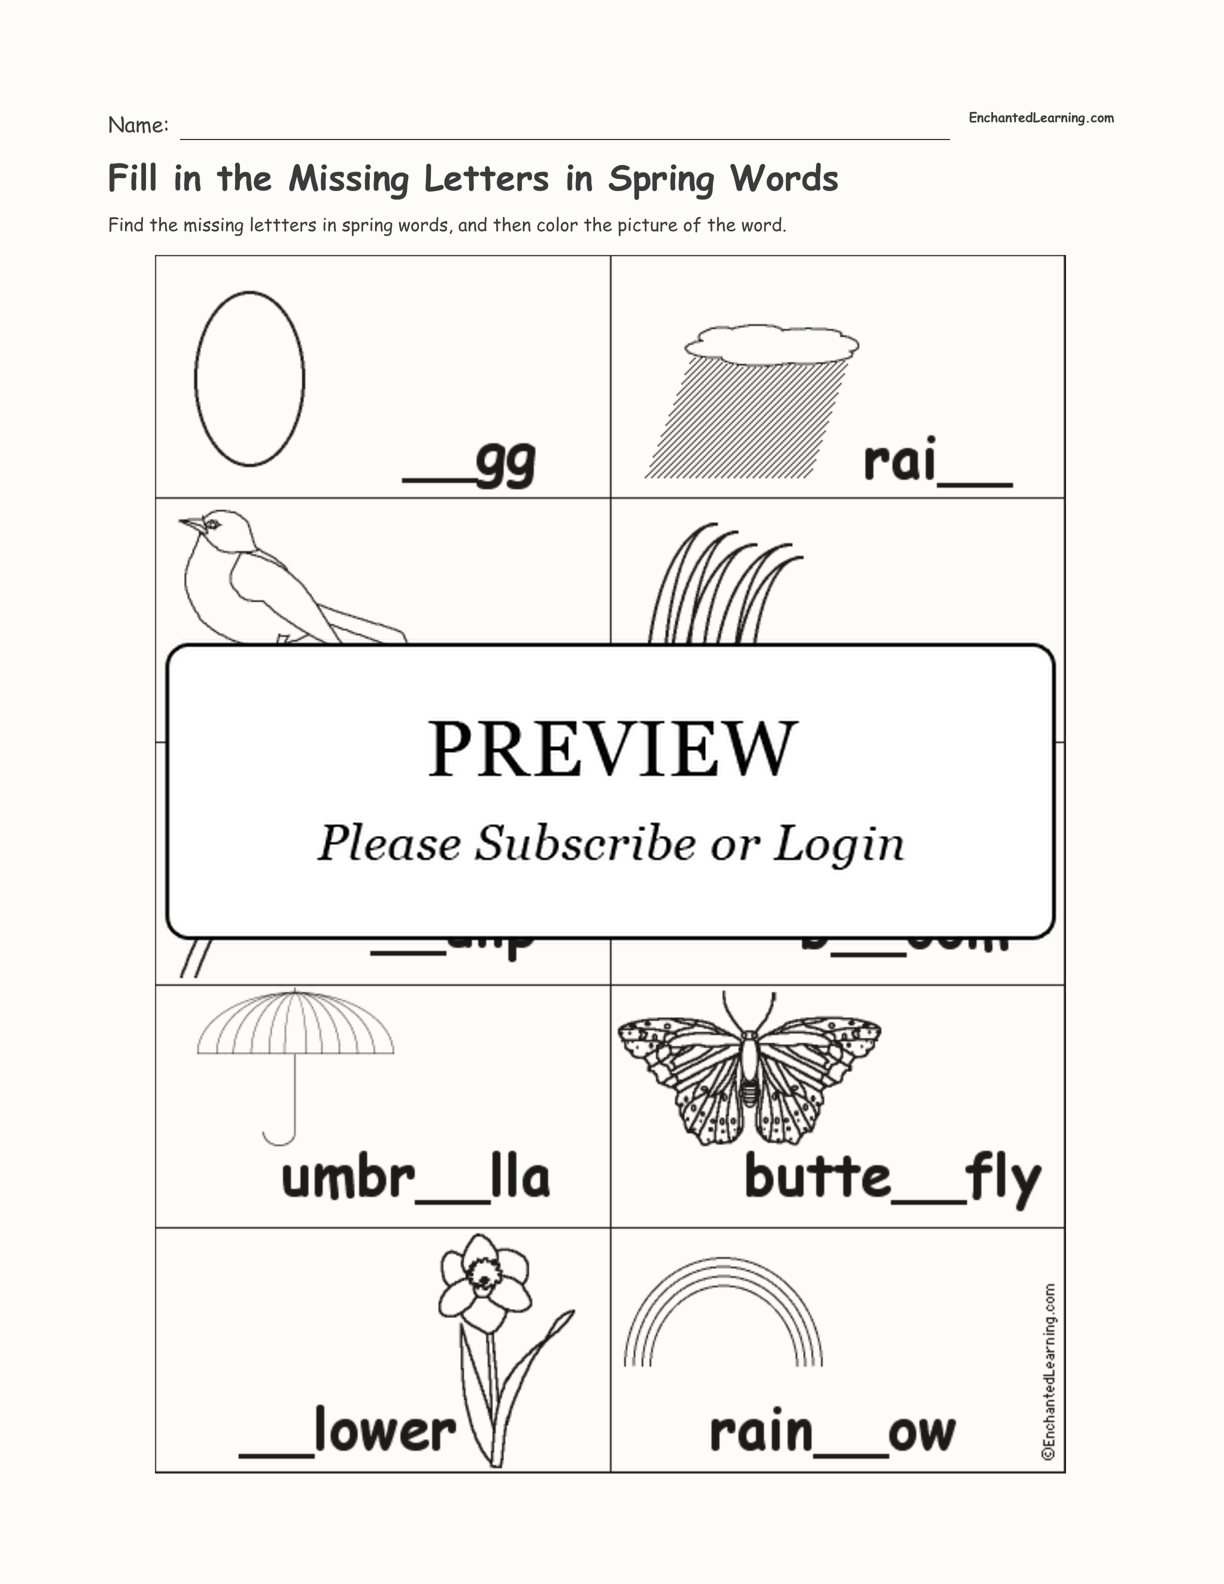 Fill in the Missing Letters in Spring Words interactive worksheet page 1